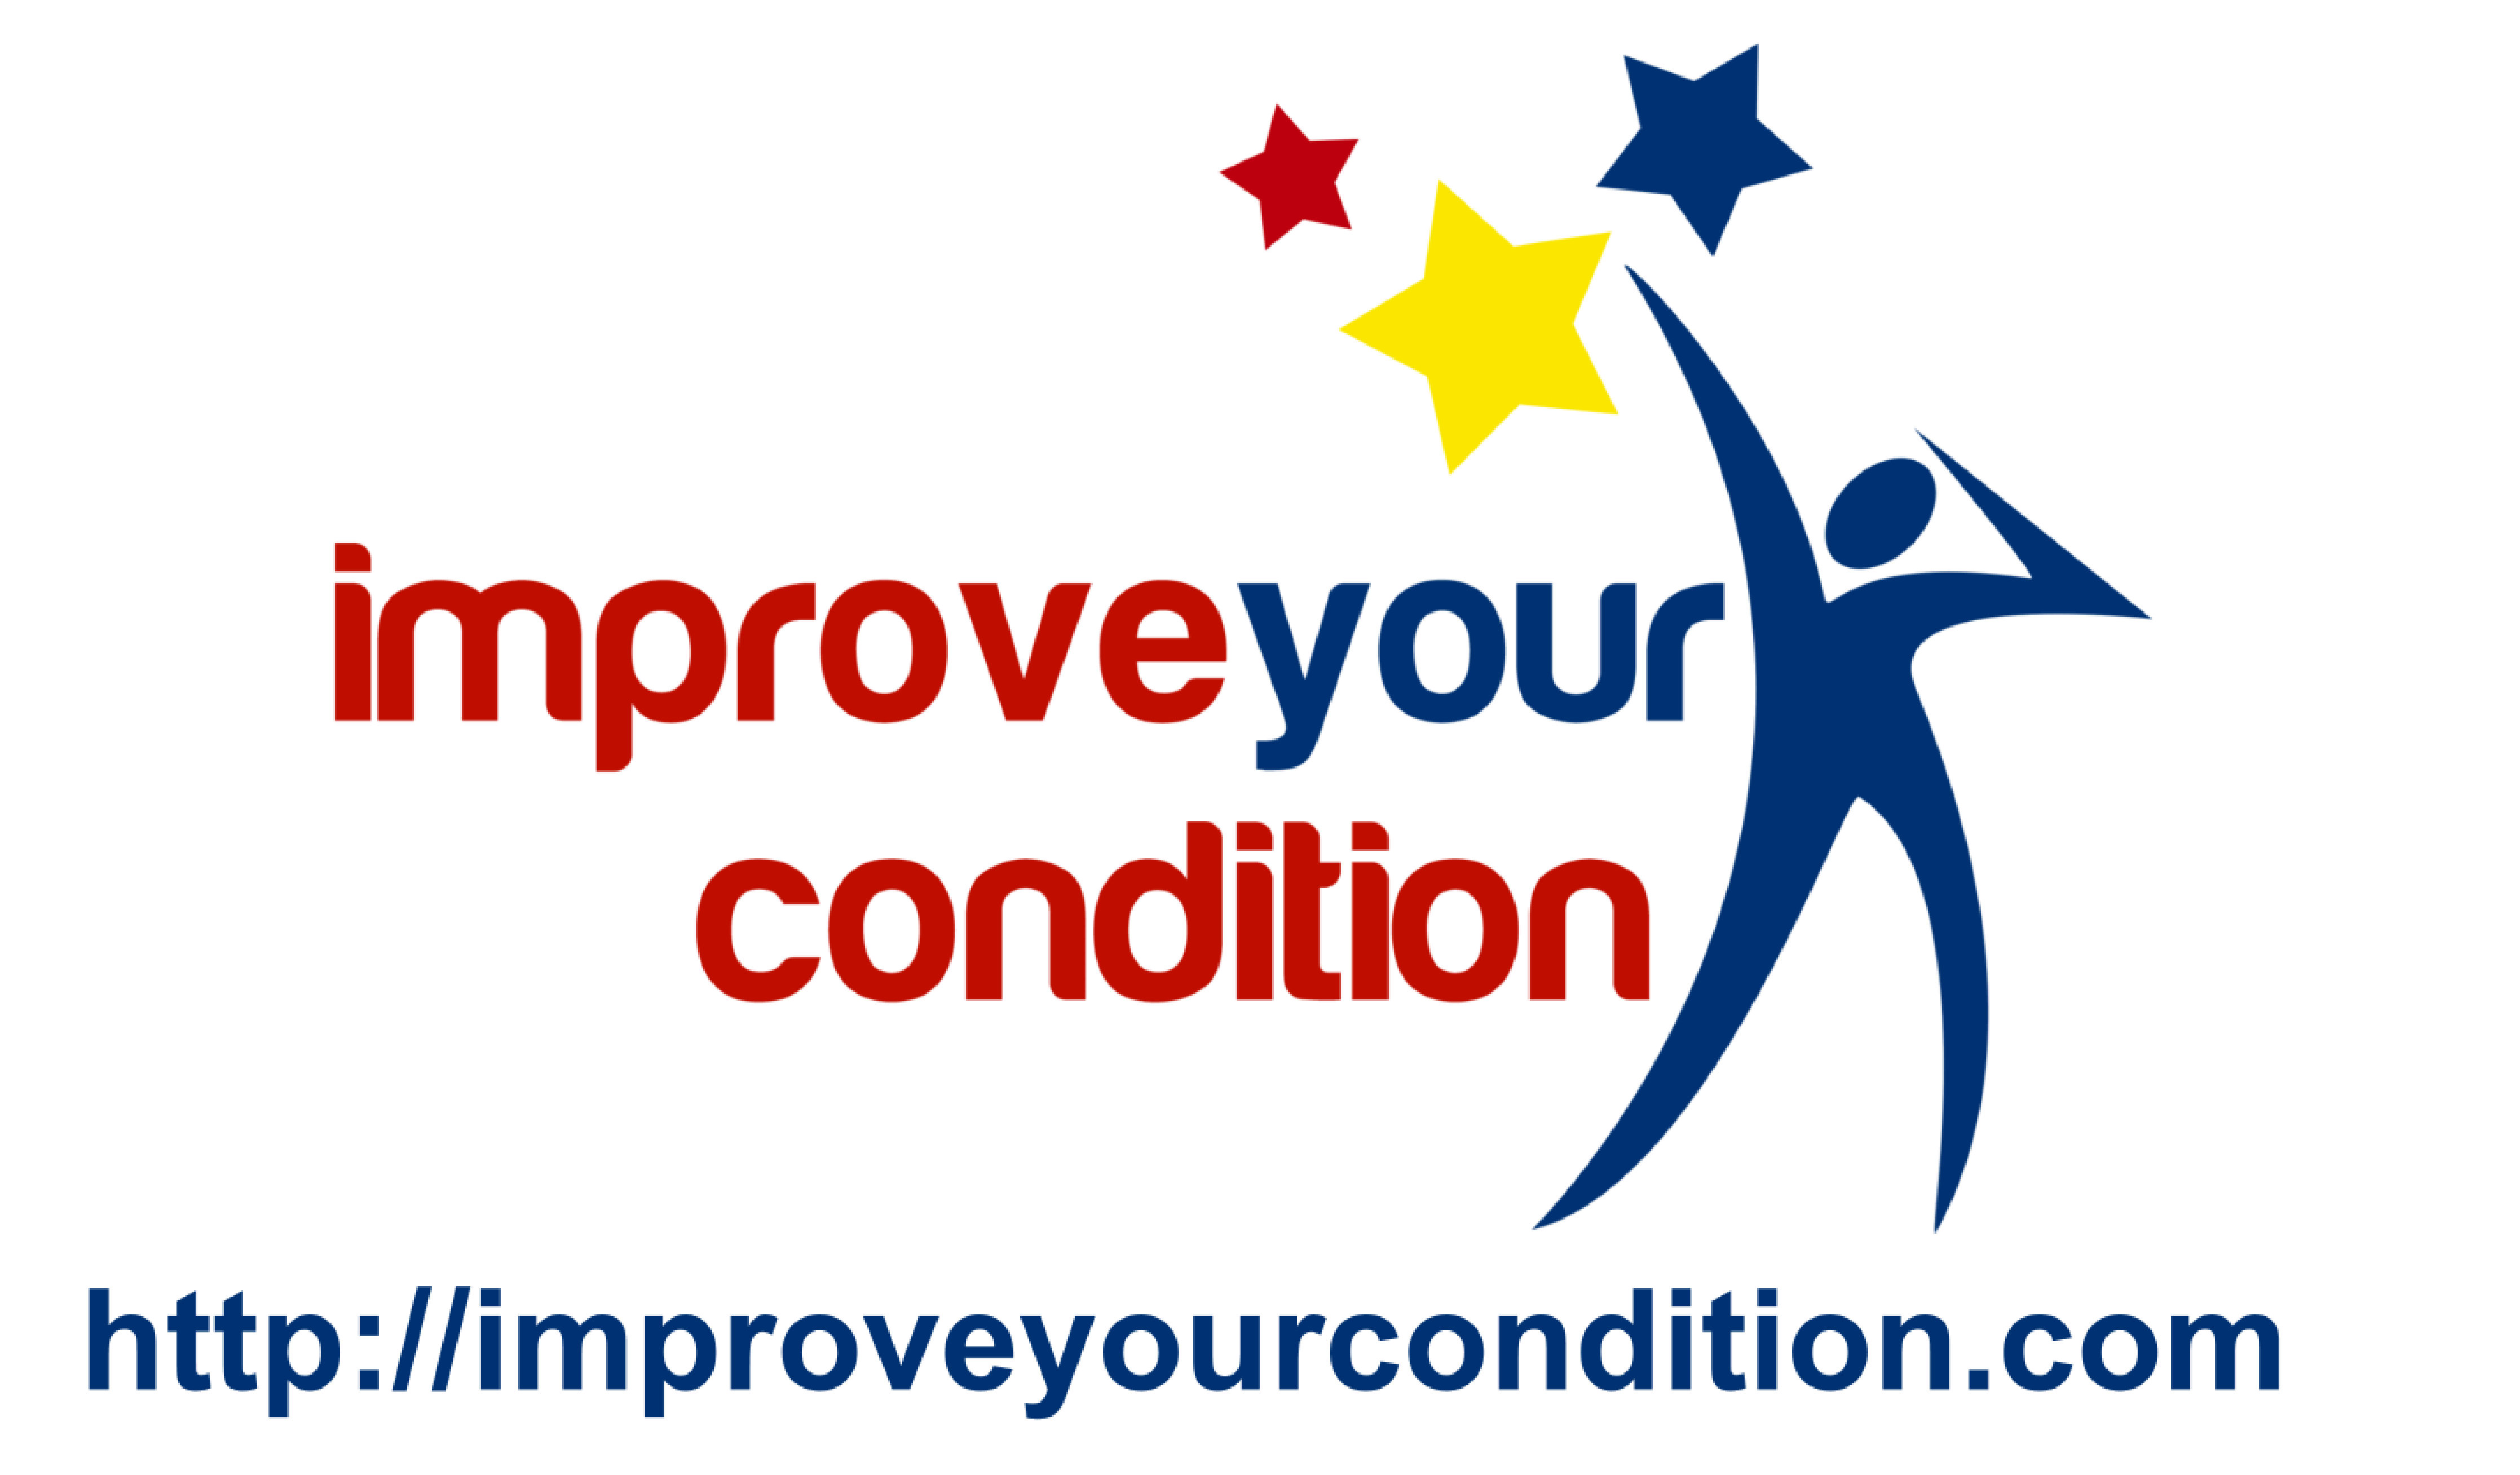 Logo of Improve Your Condition Business And Management Consultants In Gosport, Hampshire